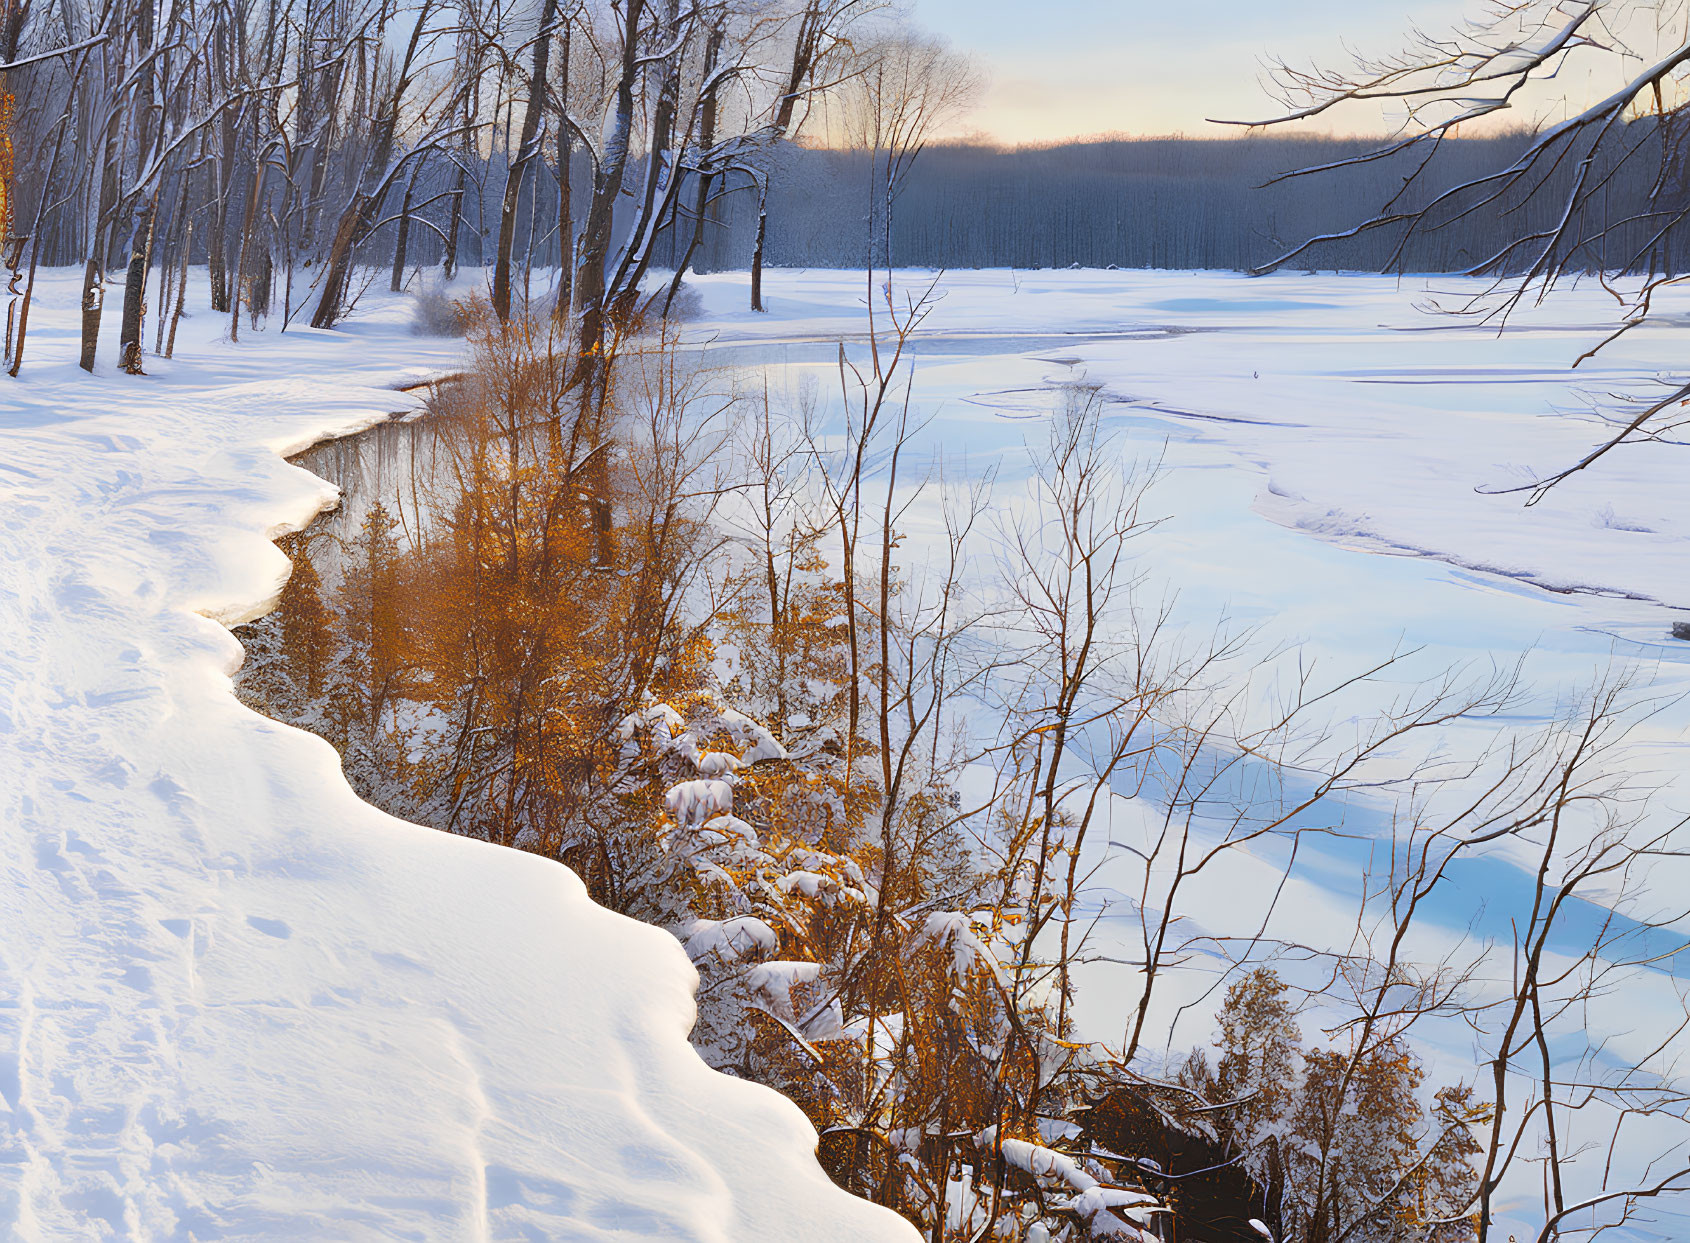 Snow-covered Riverbank with Bare Trees and Golden Shrubs in Winter Sunset